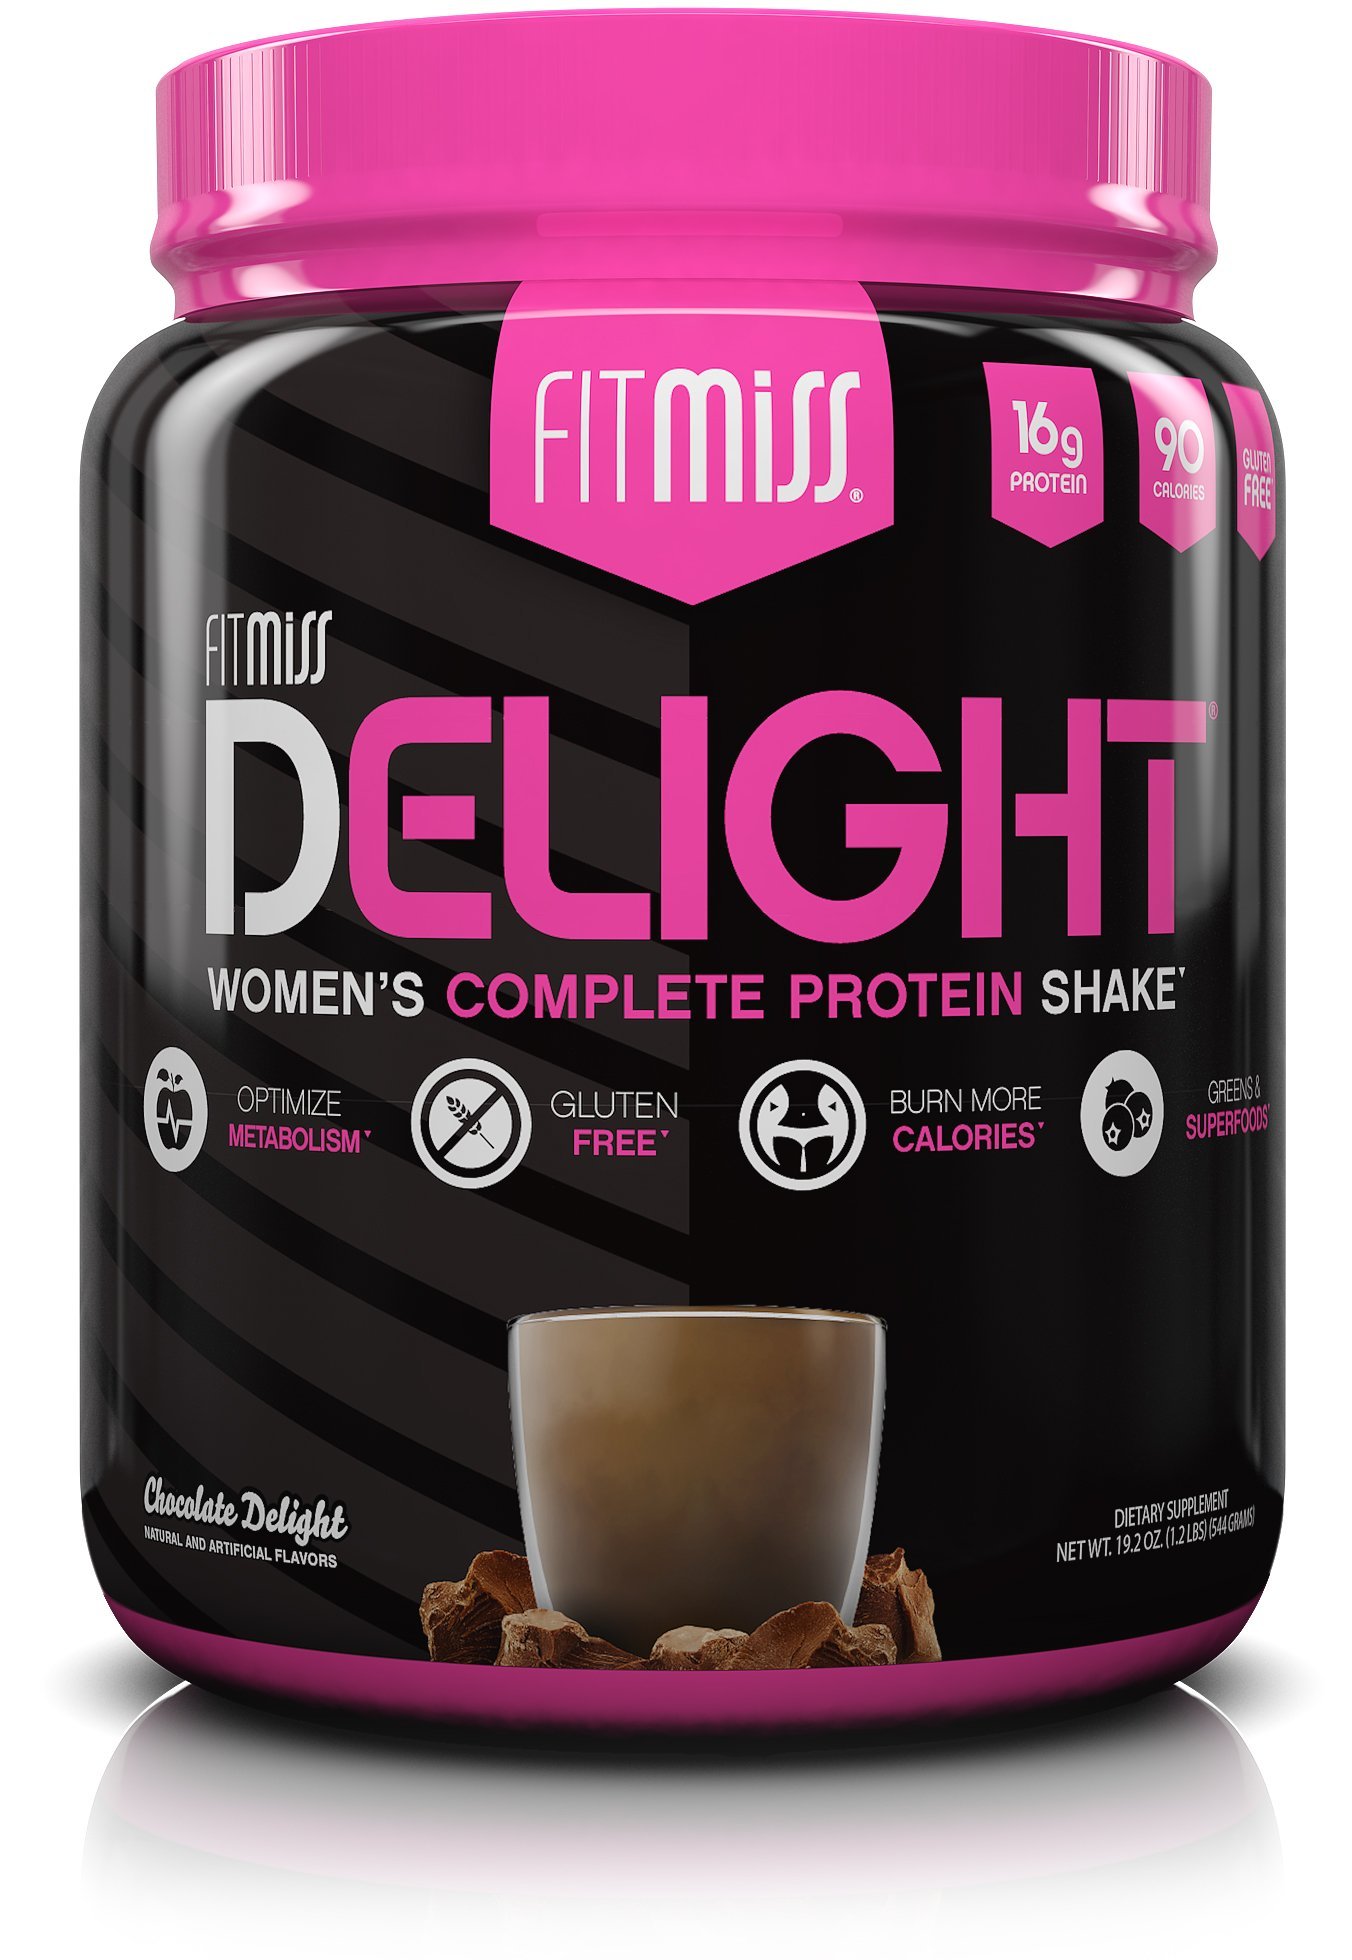 FitMiss Delight Protein Powder, Healthy Nutritional Shake ...